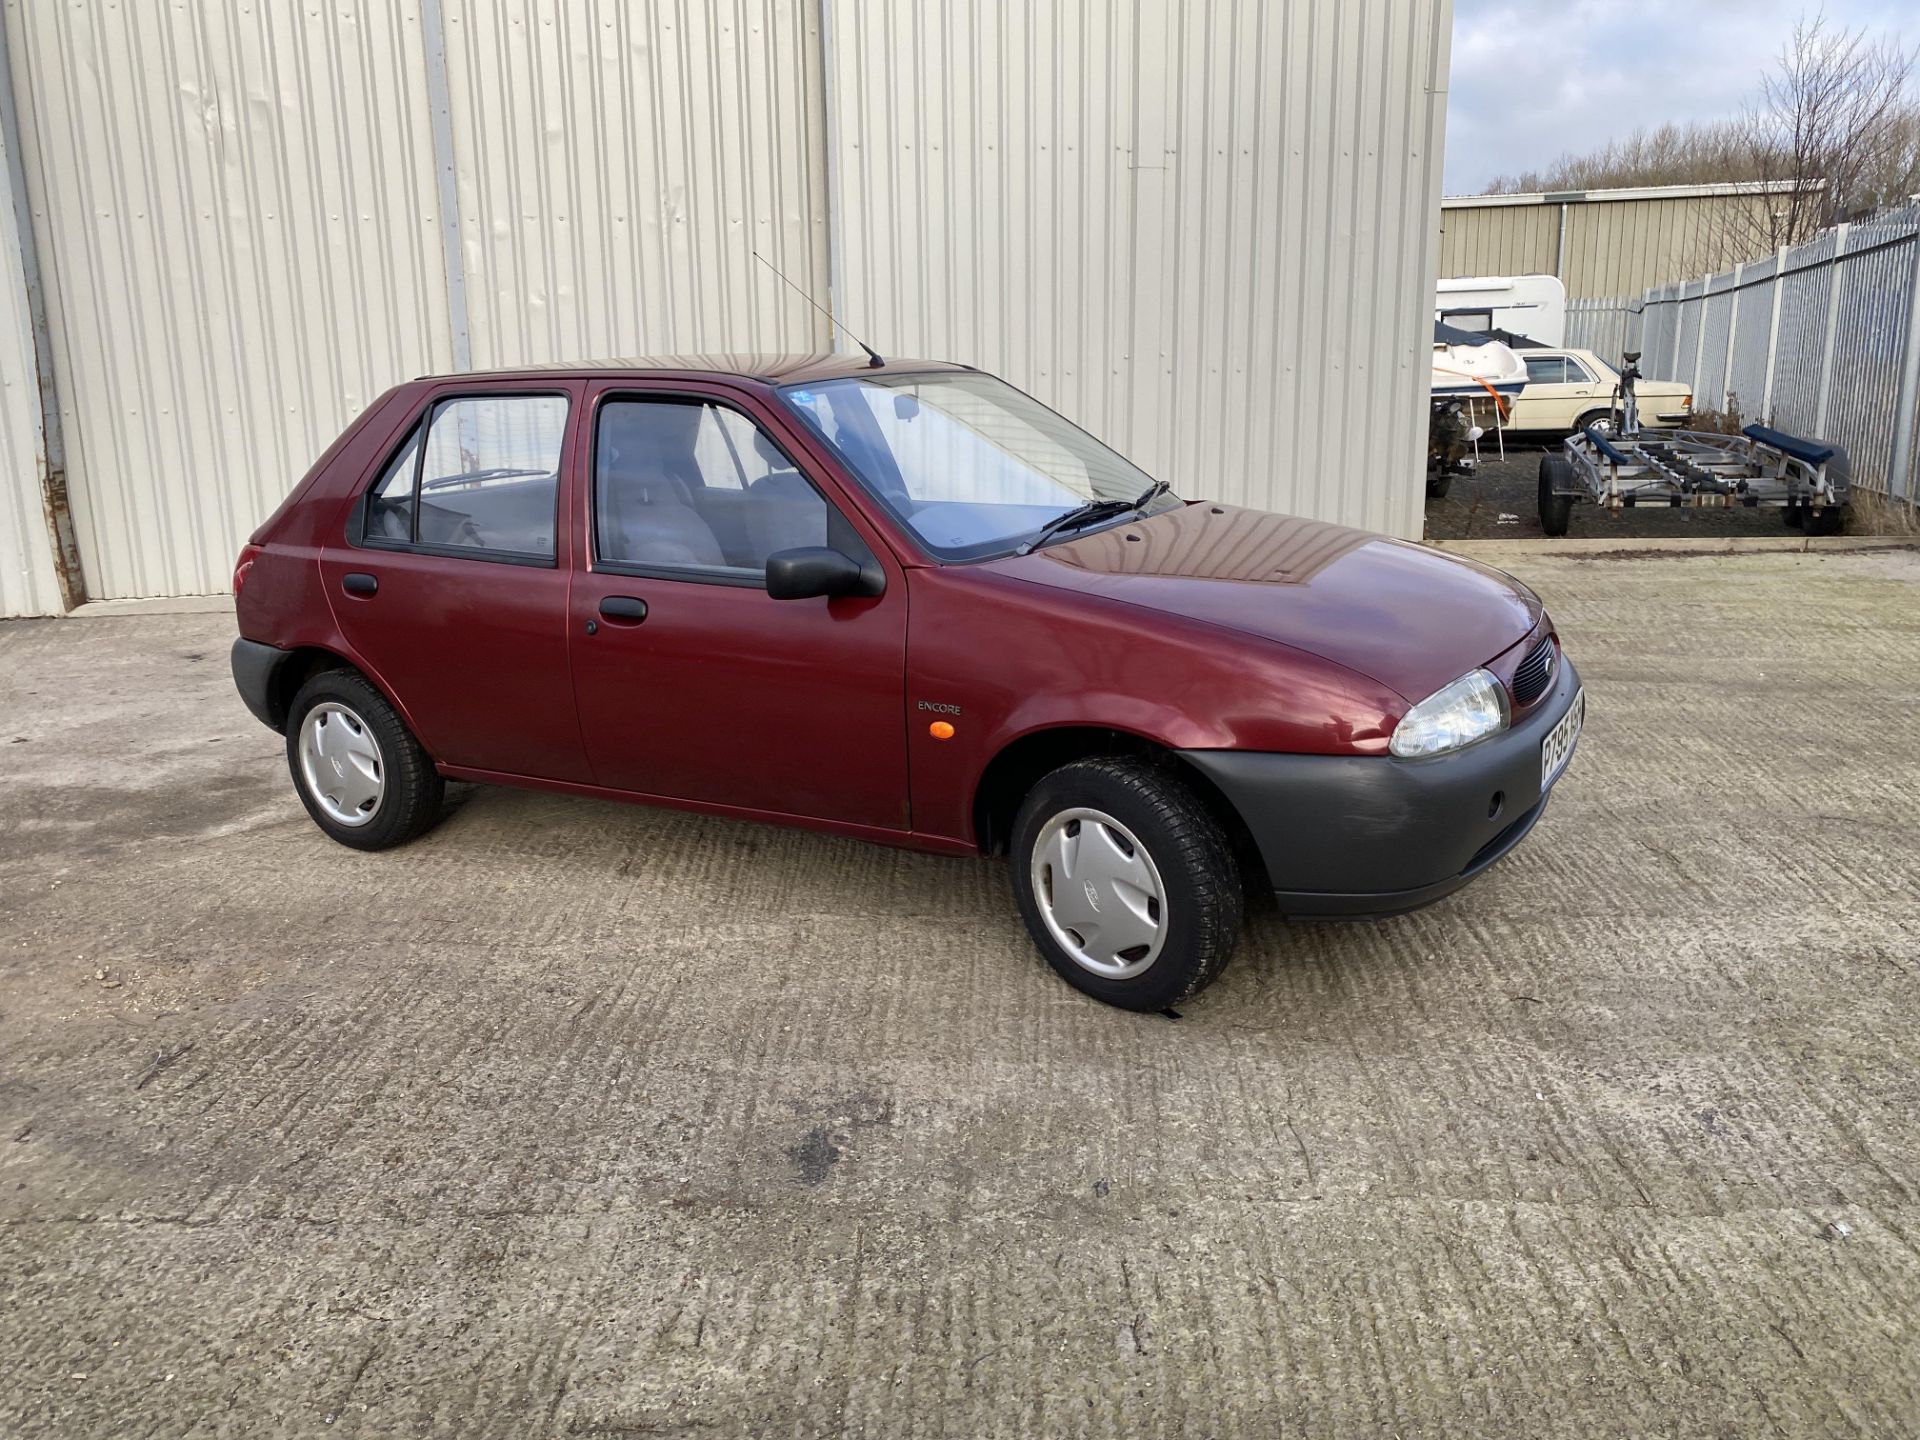 Ford Fiesta - Image 2 of 25